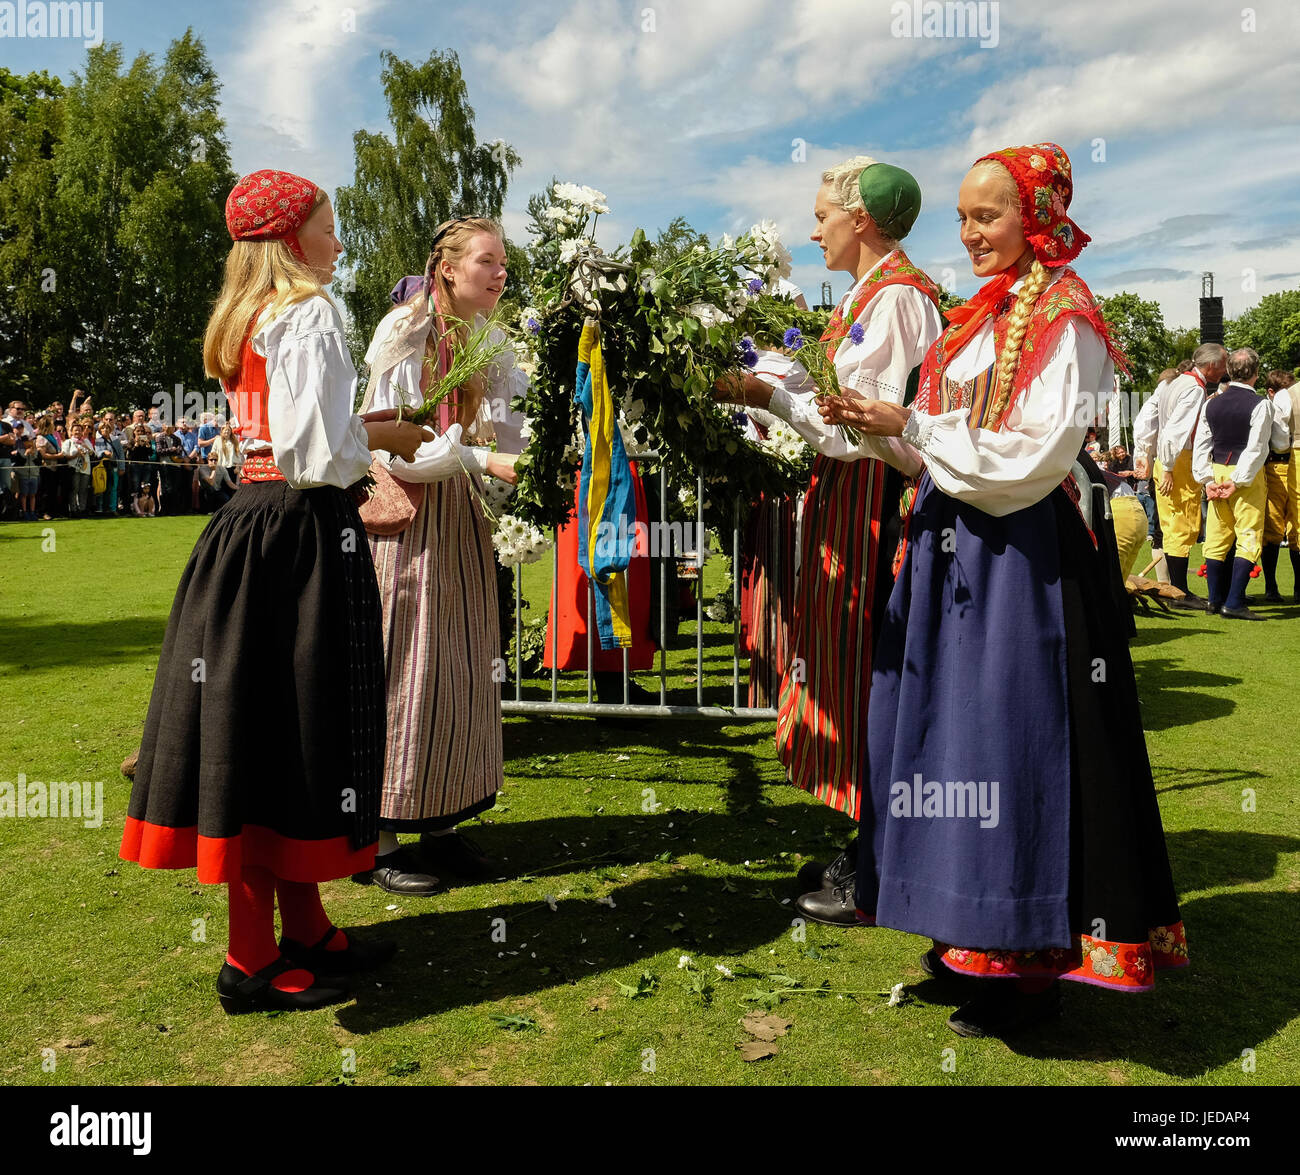 Swedish Days High Resolution Stock Photography and Images - Alamy